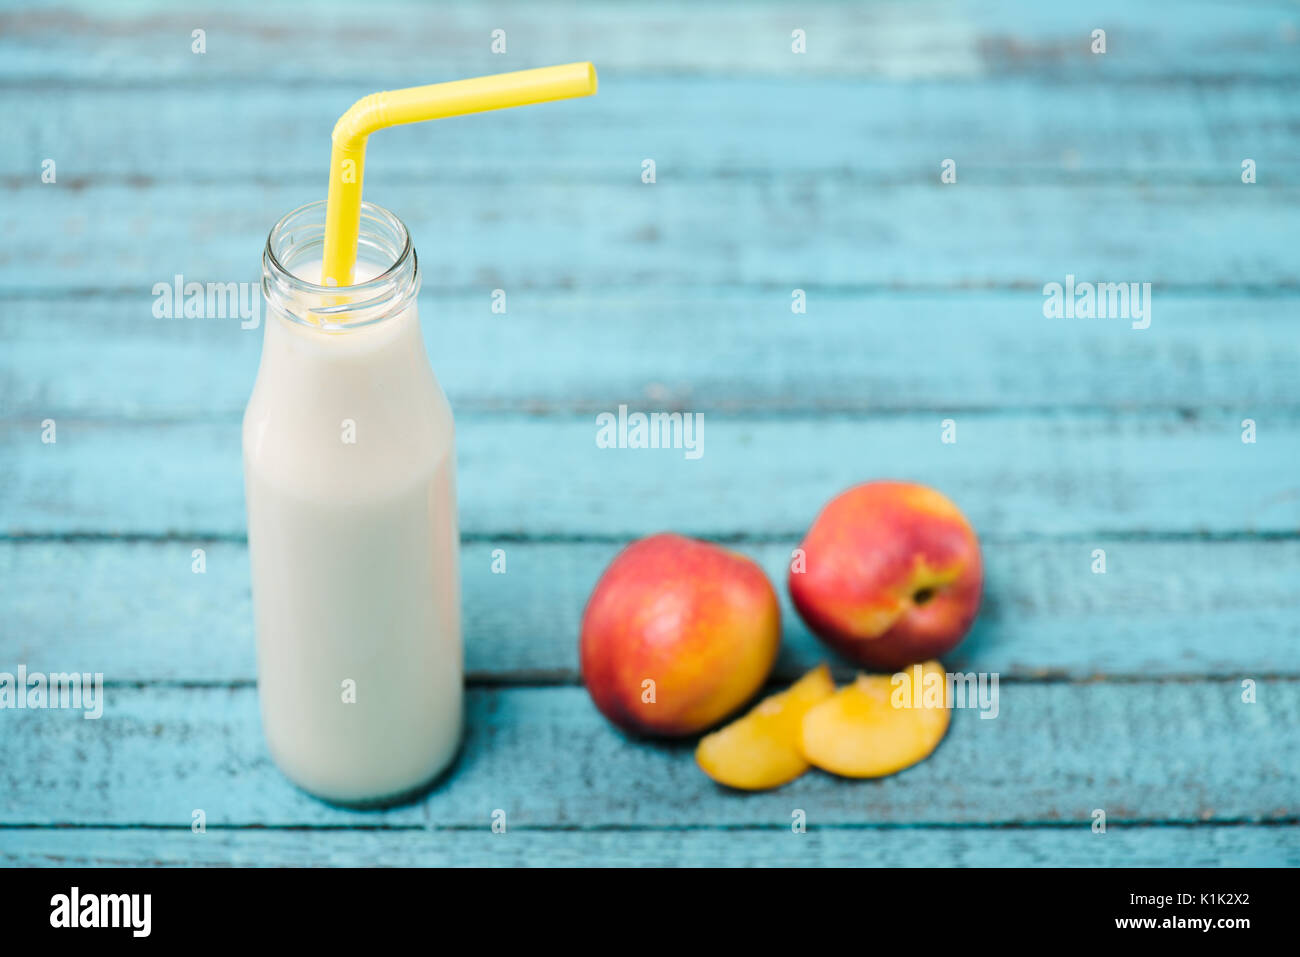 Close-up view of delicious fruity milkshake in glass bottle with drinking straw Stock Photo